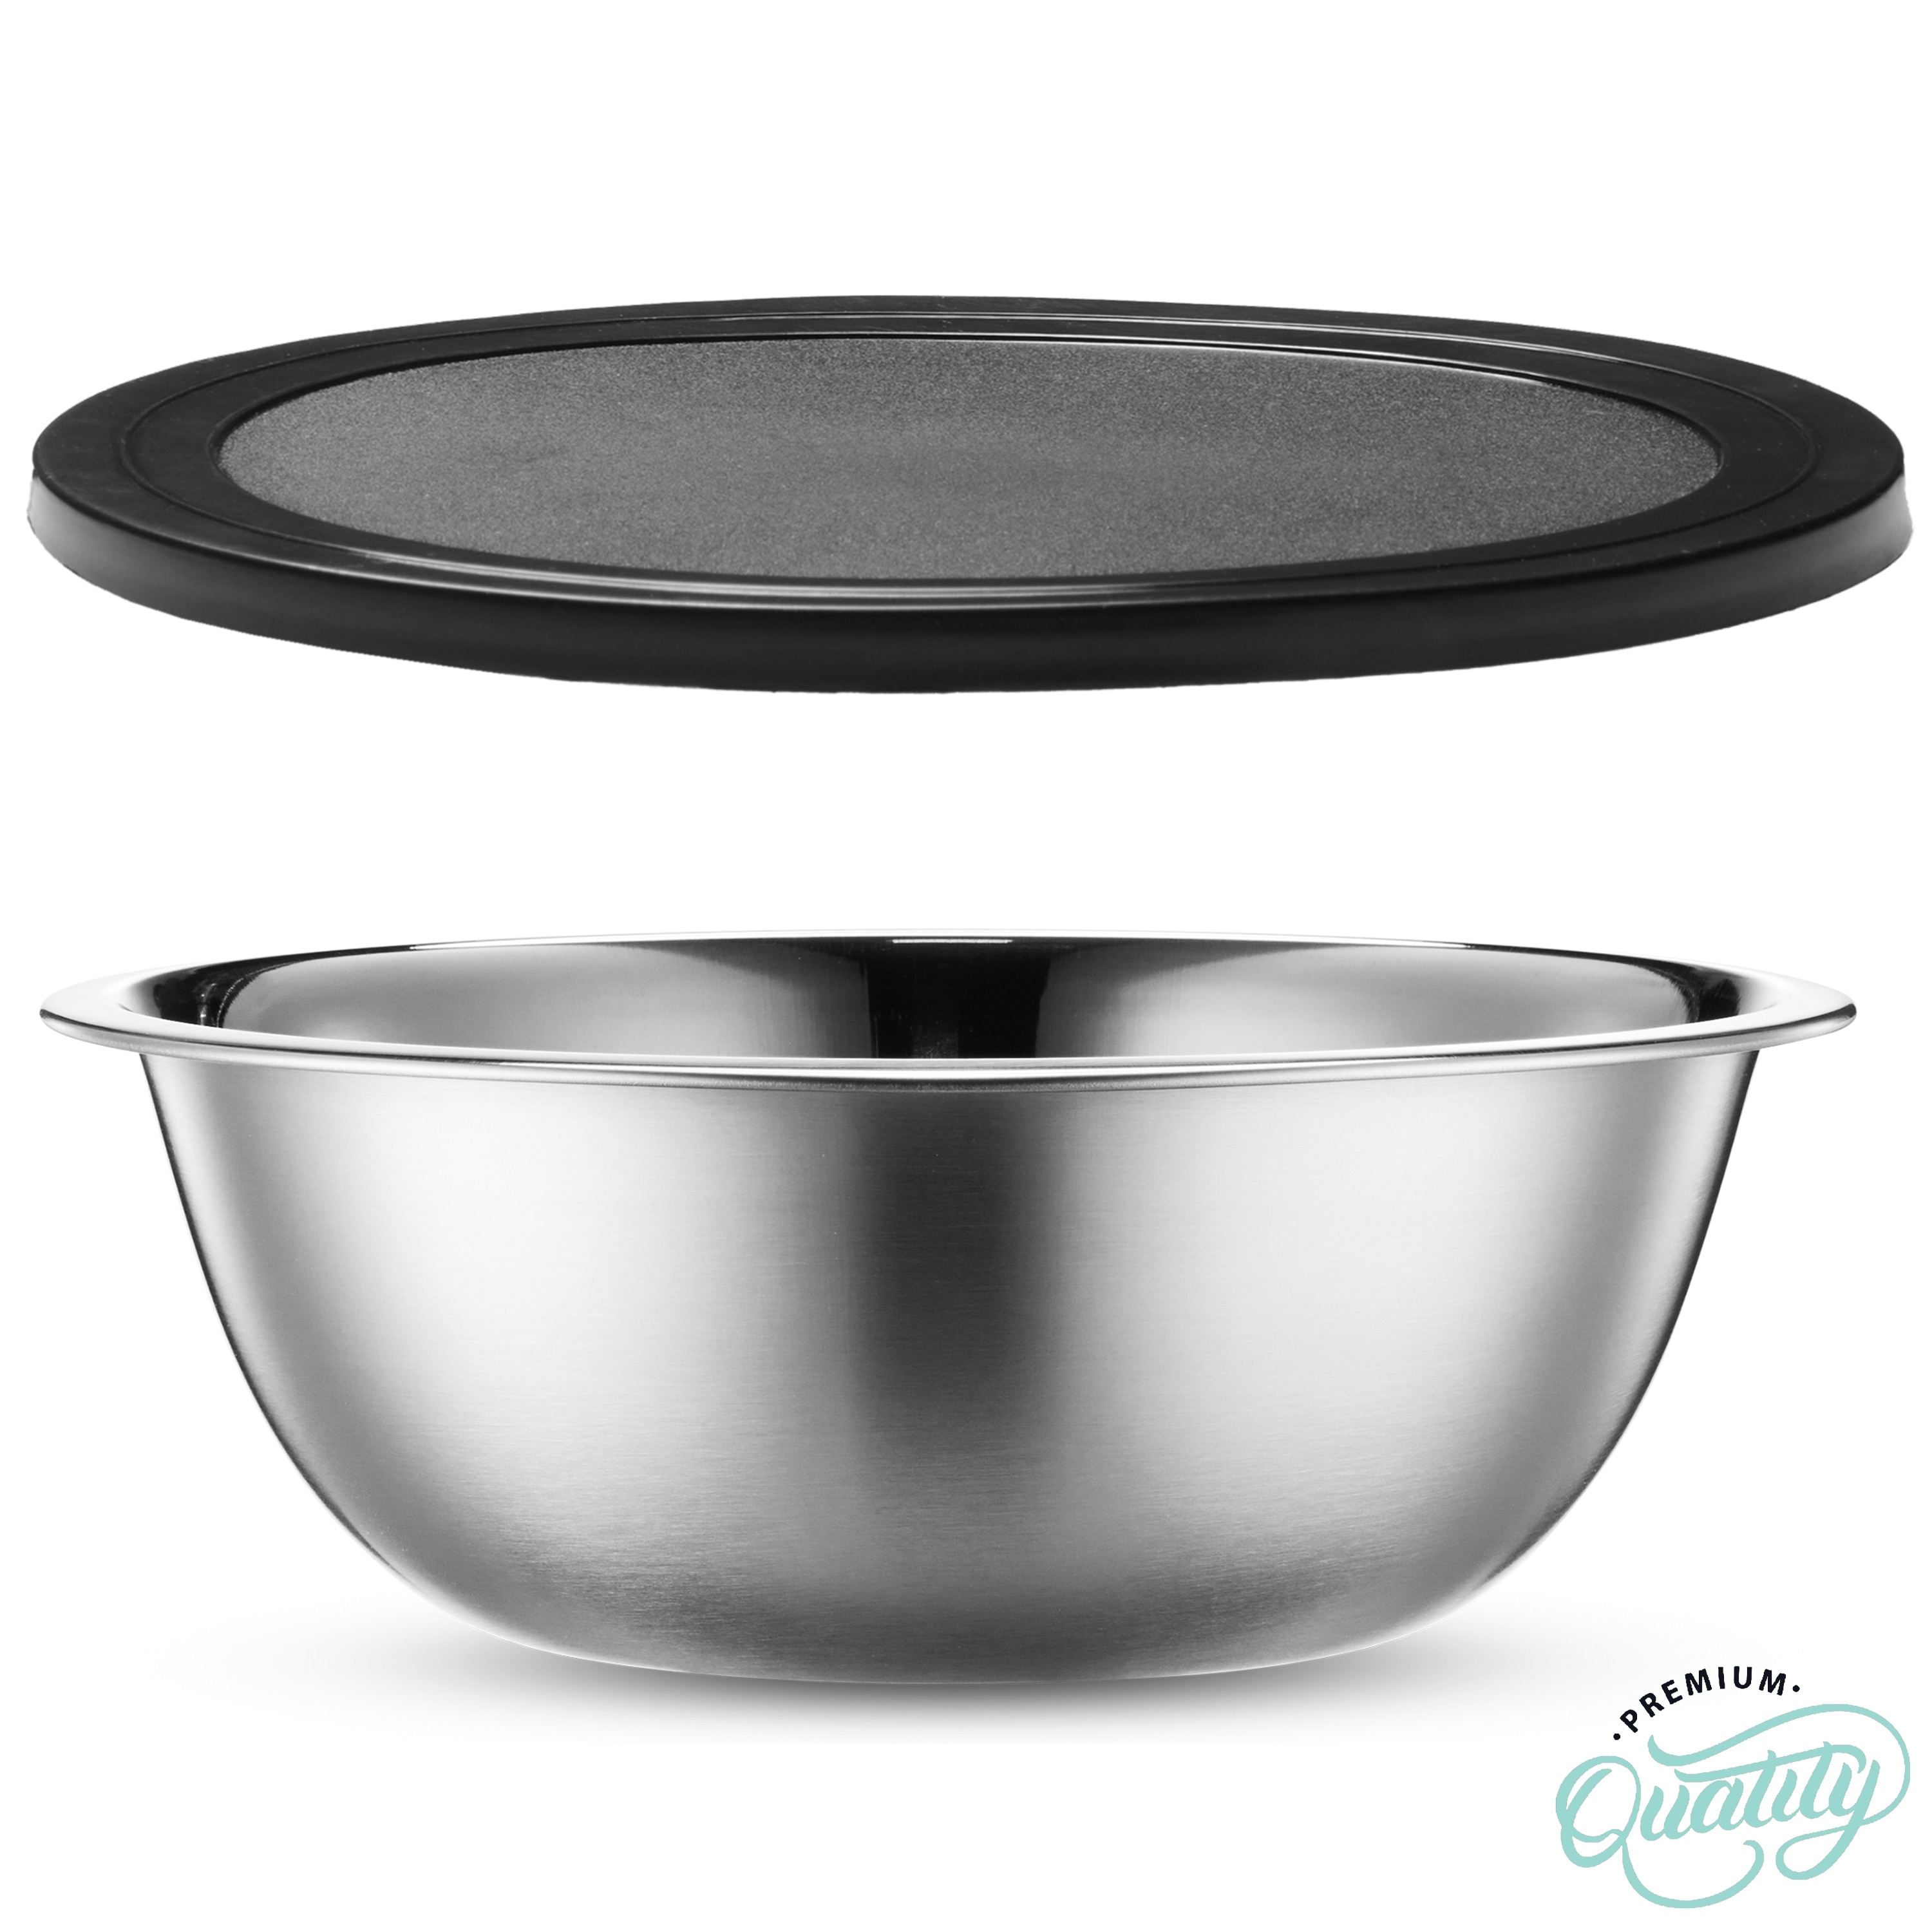 https://ak1.ostkcdn.com/images/products/is/images/direct/1c22ef6cdfdb853e14dcfd7bd71b0852770f2567/Heavy-Duty-Meal-Prep-Stainless-Steel-Mixing-Bowls-Set-with-Lids.jpg